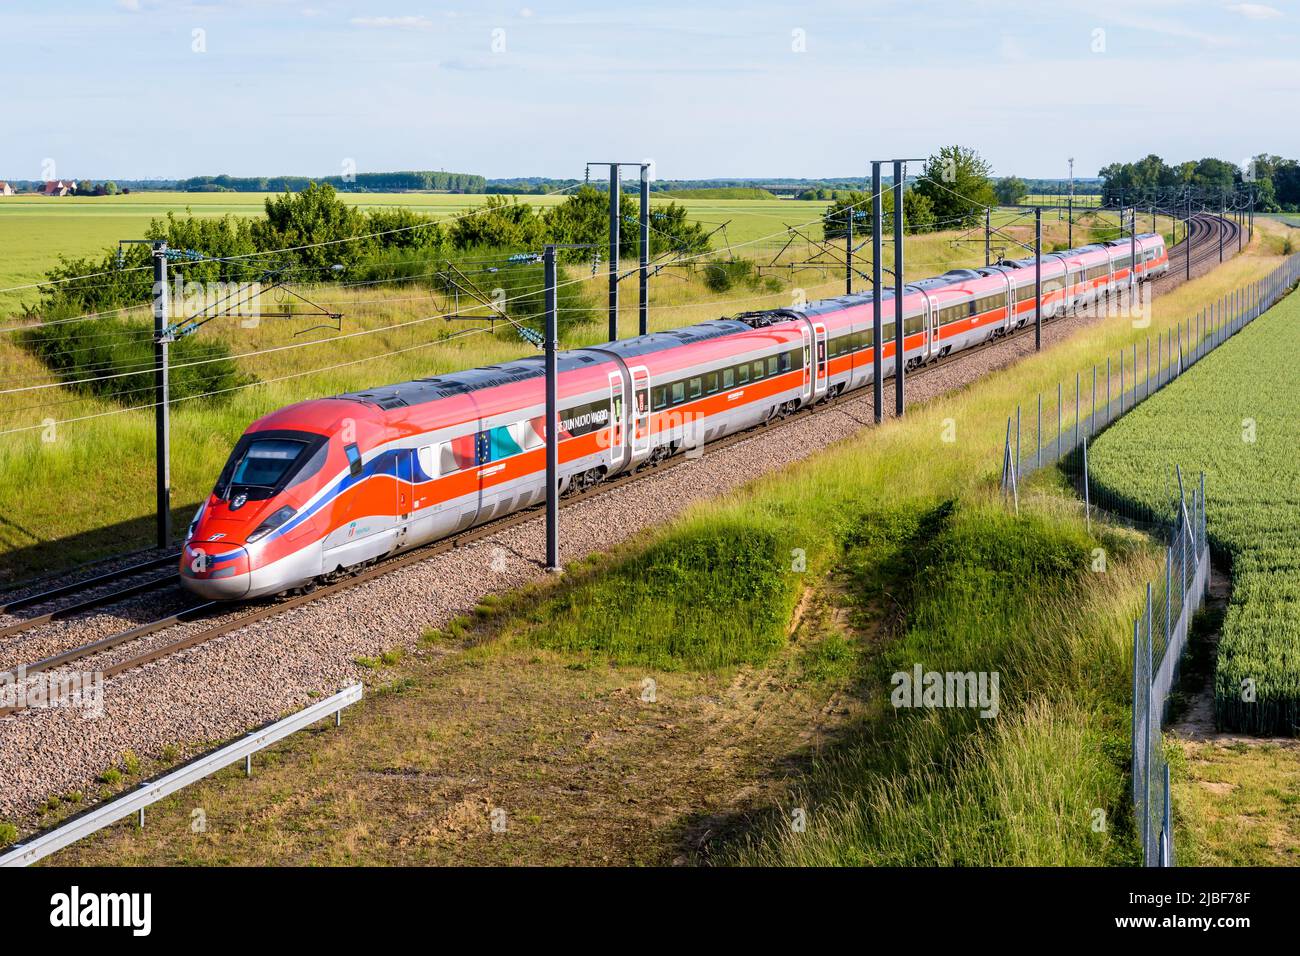 A Frecciarossa (ETR 1000) high speed train from italian rail company Trenitalia is driving from Lyon to Paris on the LGV Sud-Est in the countryside. Stock Photo